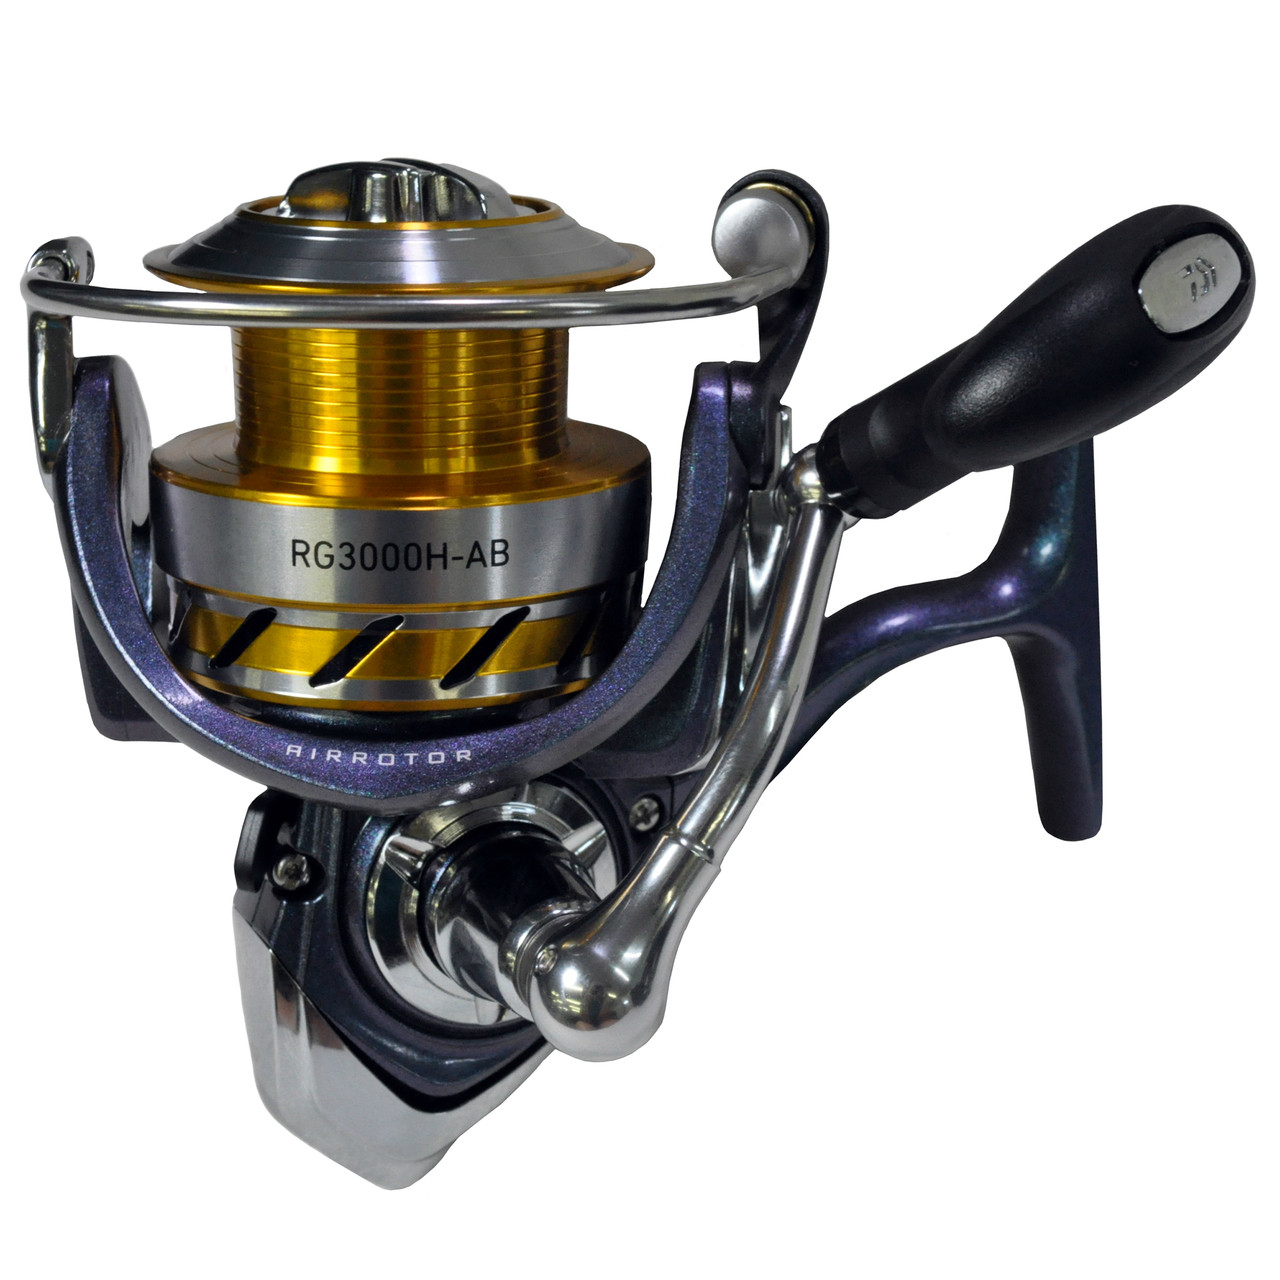 https://cdn10.bigcommerce.com/s-hudw0p8/products/37011/images/5131/rg3000h-ab-cp-daiwa-regal-airbail-spinning-reel-1__86488.1530490283.1280.1280.jpg?c=2